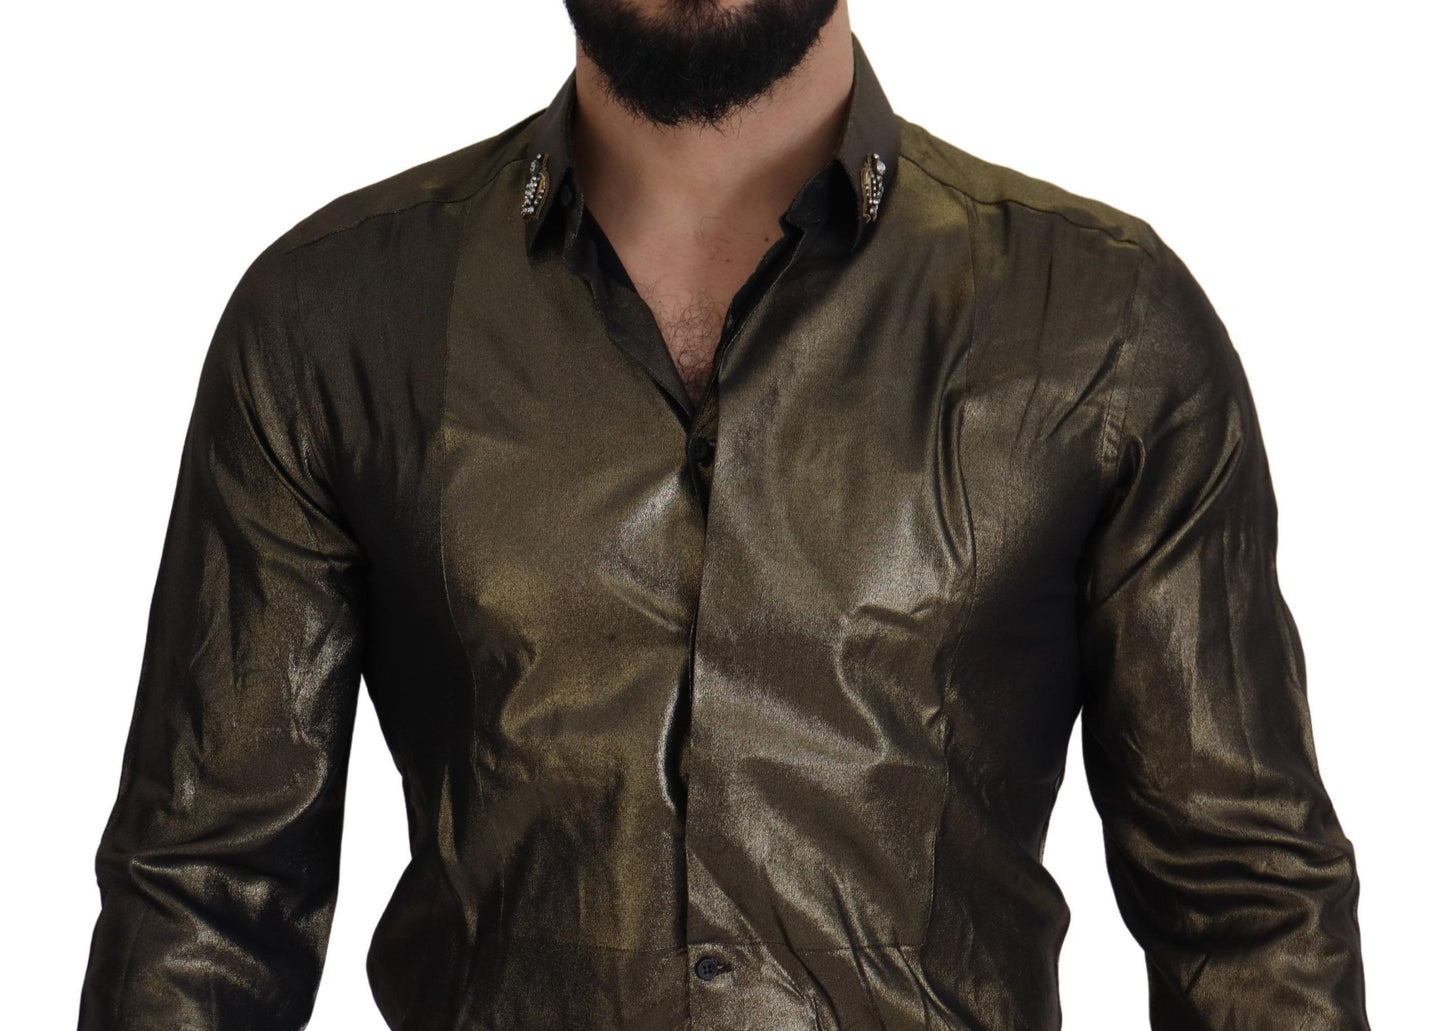 Dolce & Gabbana Elegant Gold Slim Fit Shirt with Crown Embroidery